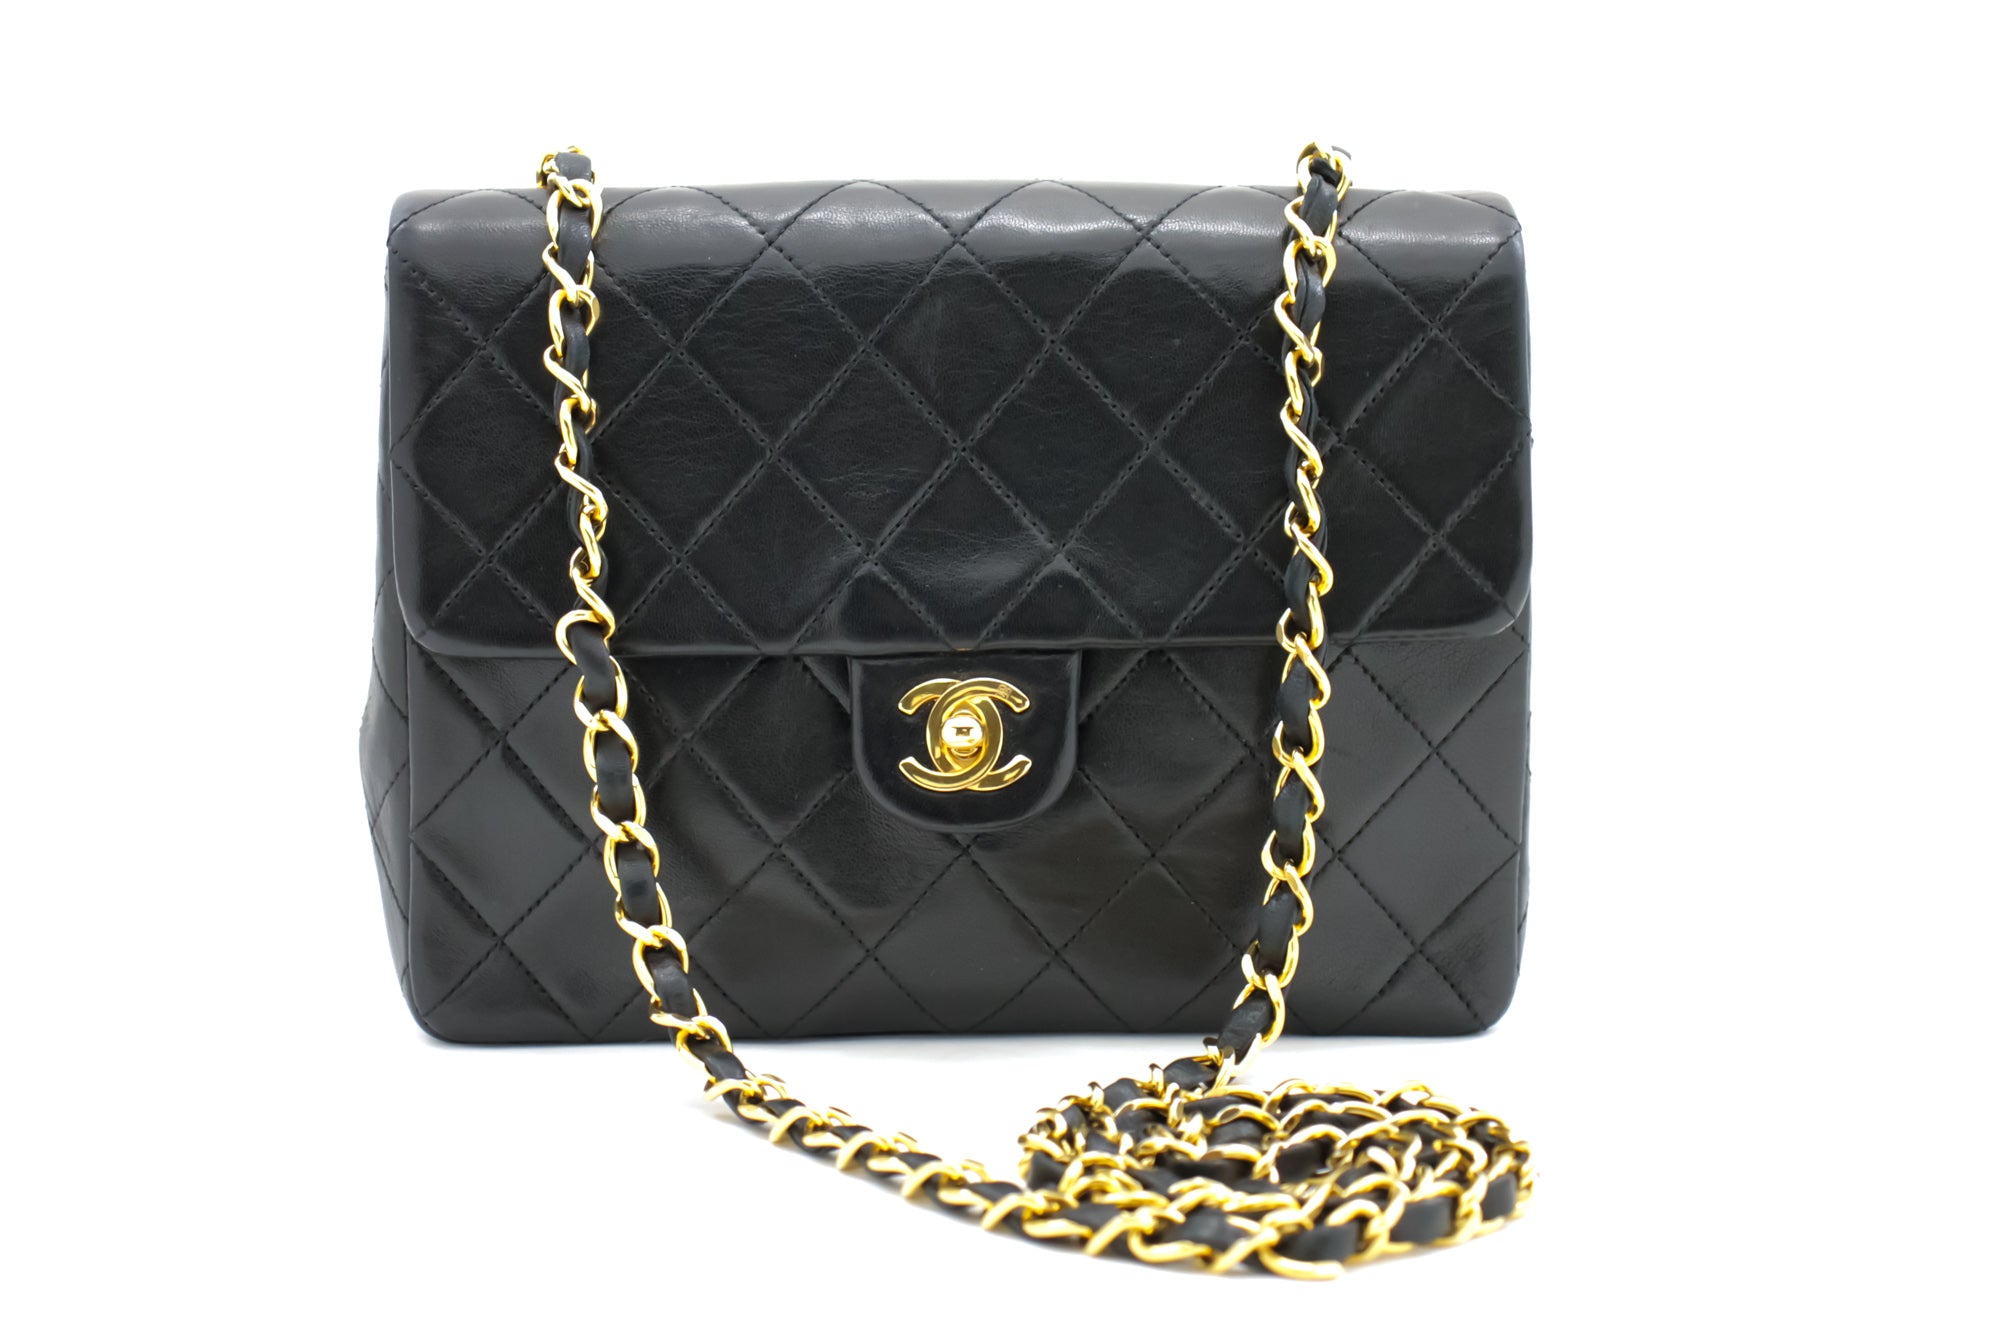 Chanel Green Quilted Lambskin Classic Square Flap Mini